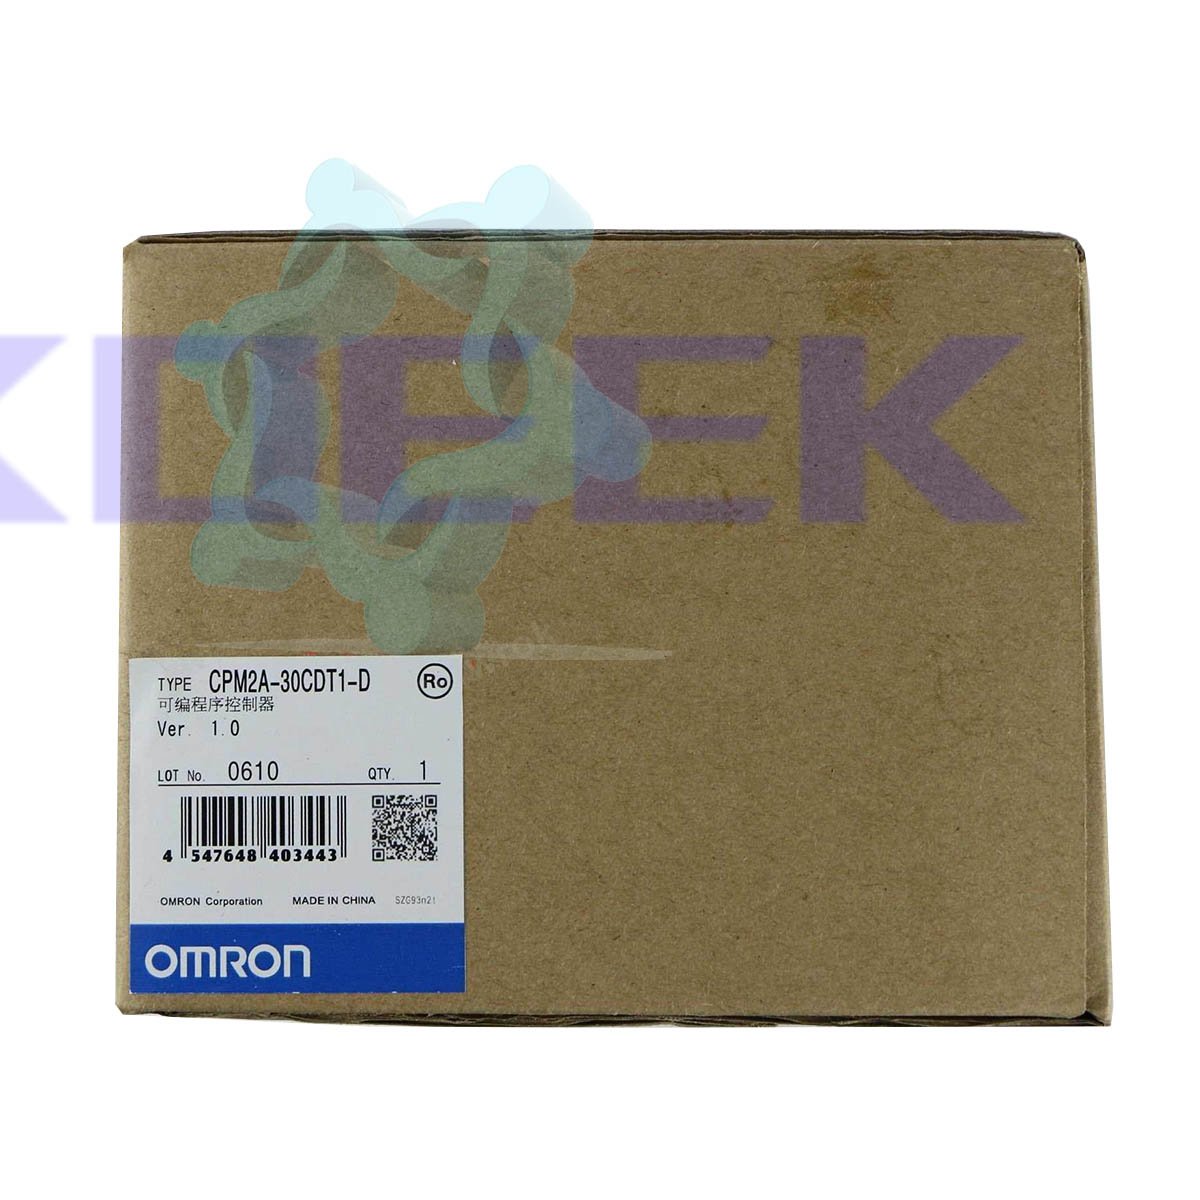 CPM2A-30CDT1-D KOEED 500+, 80%, import_2020_10_10_031751, Omron, Other